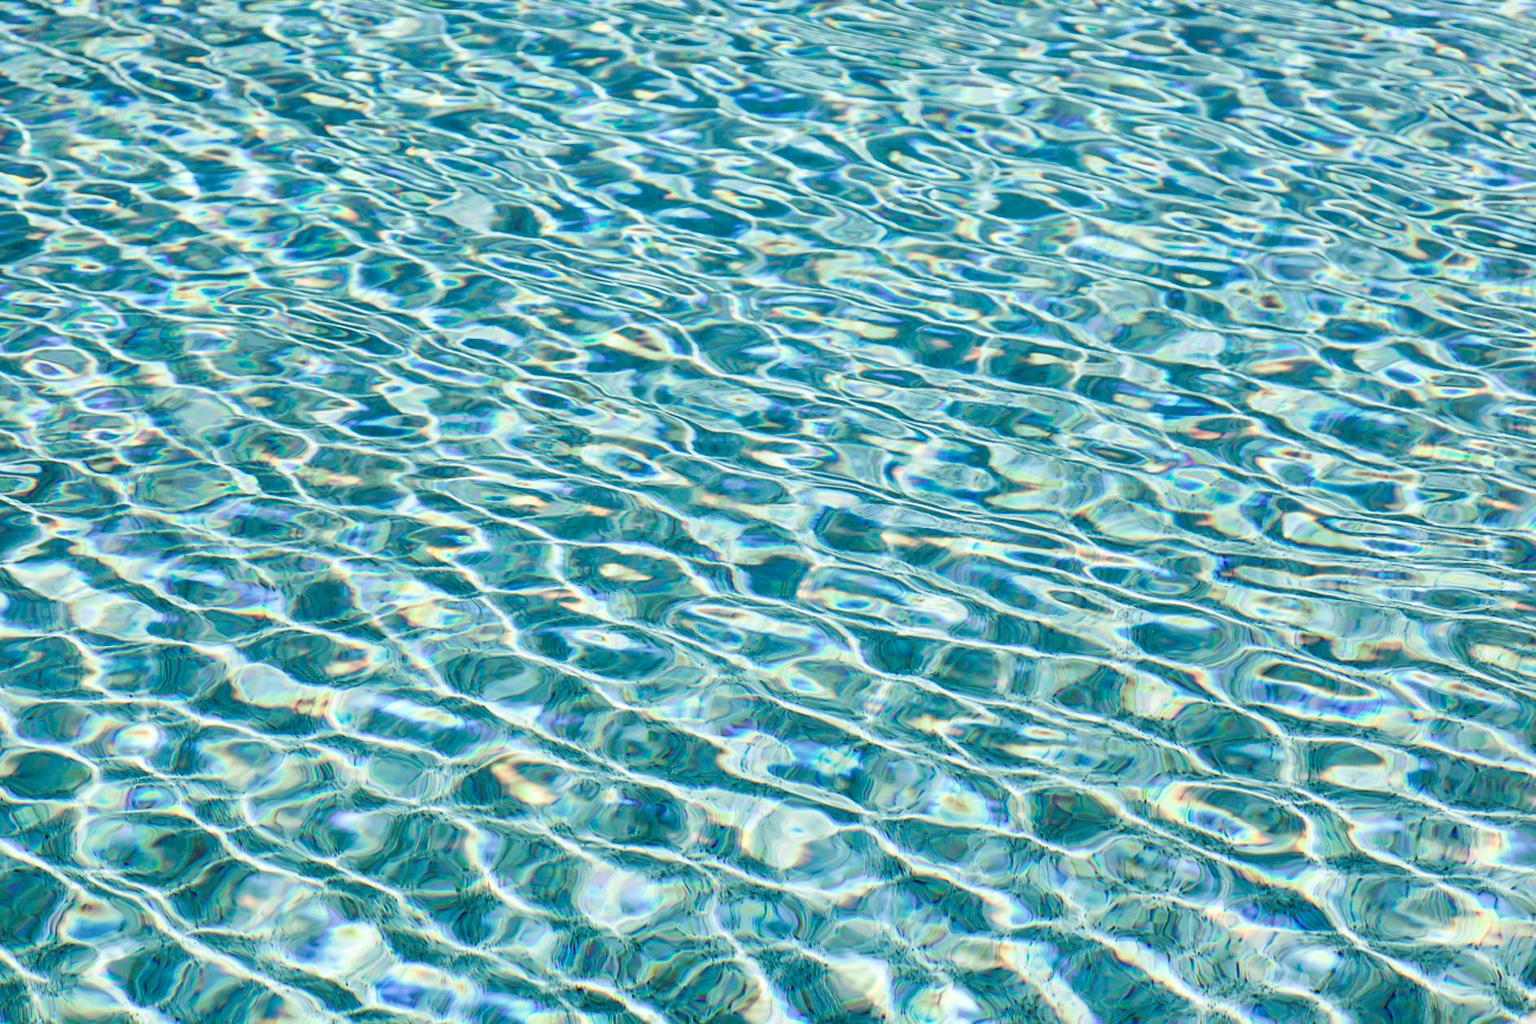 H2O lll - large format photograph of sun reflections on pool water surface